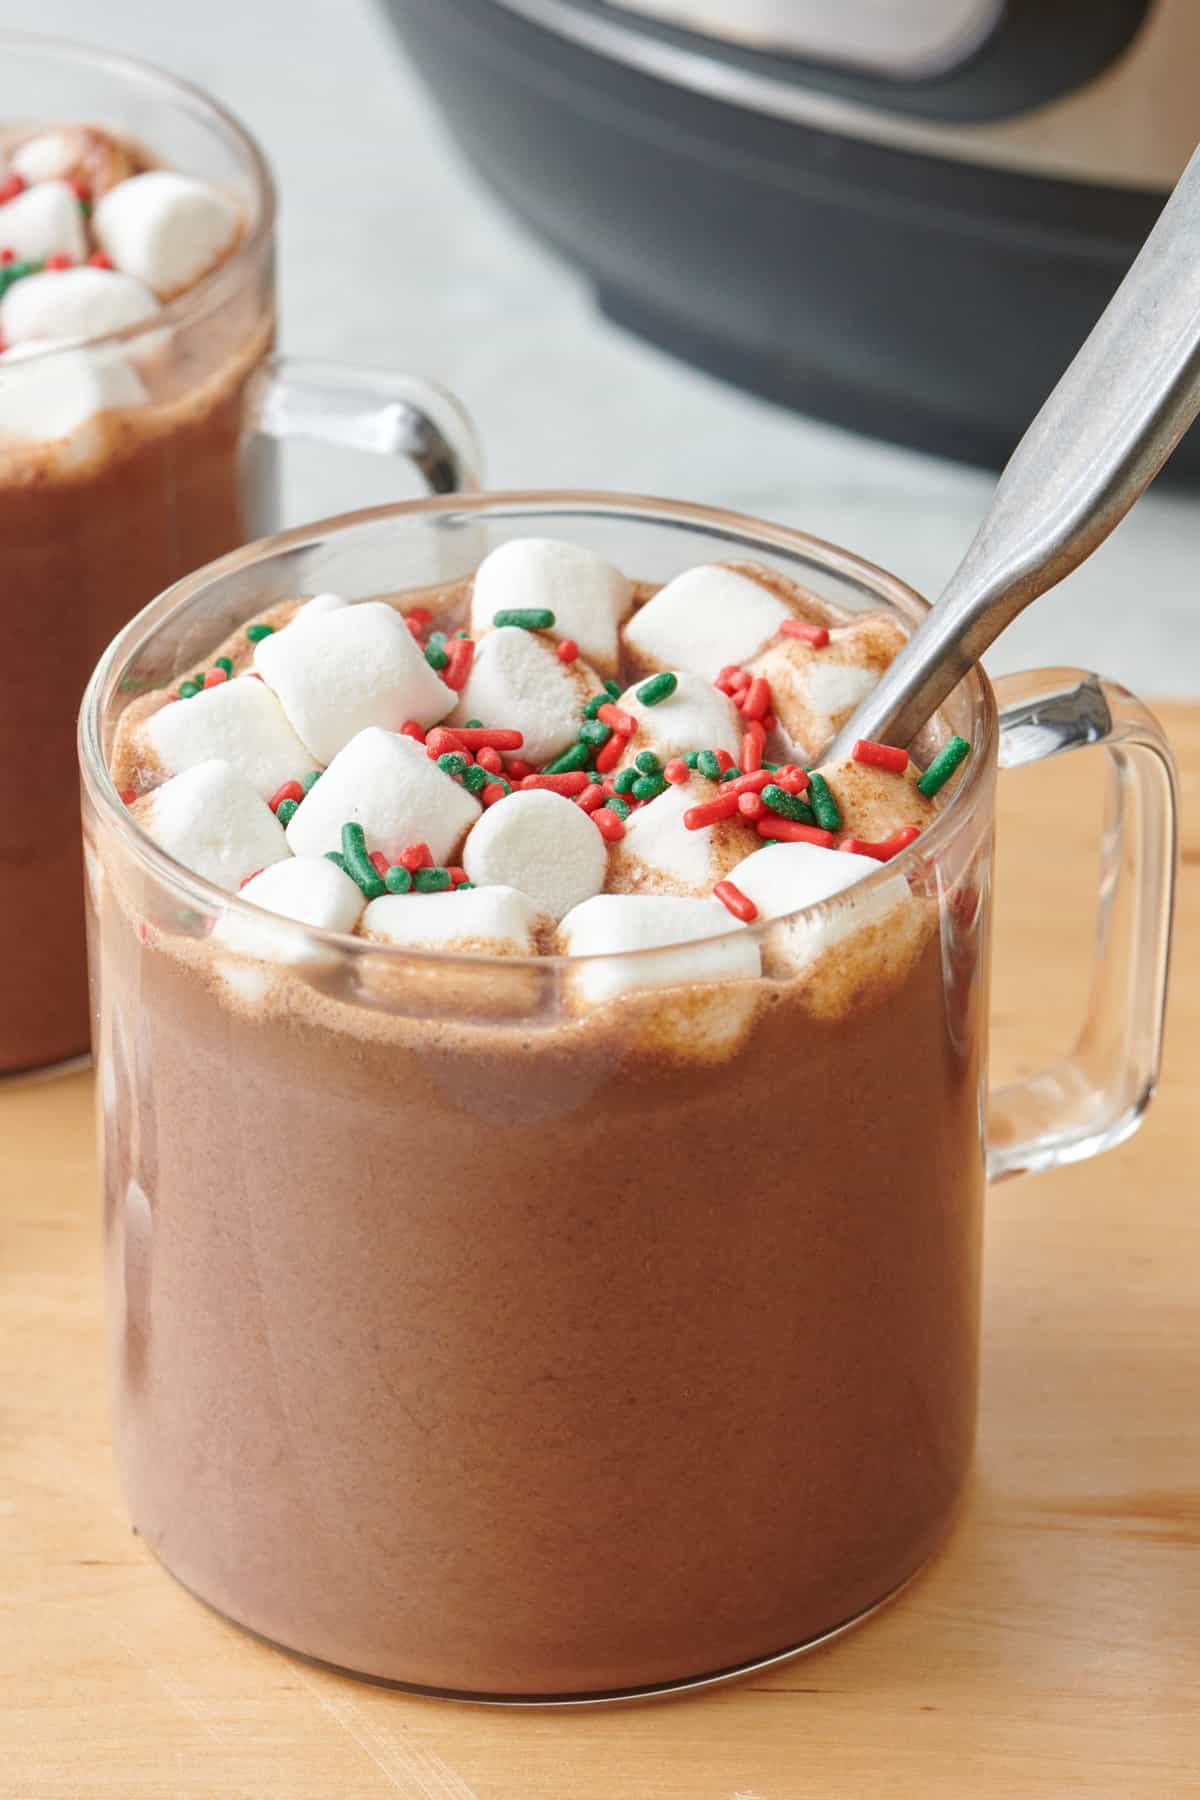 Homemade hot chocolate in a glass mug with a spoon dipped in and topped with mini marshmallows and sprinkles.